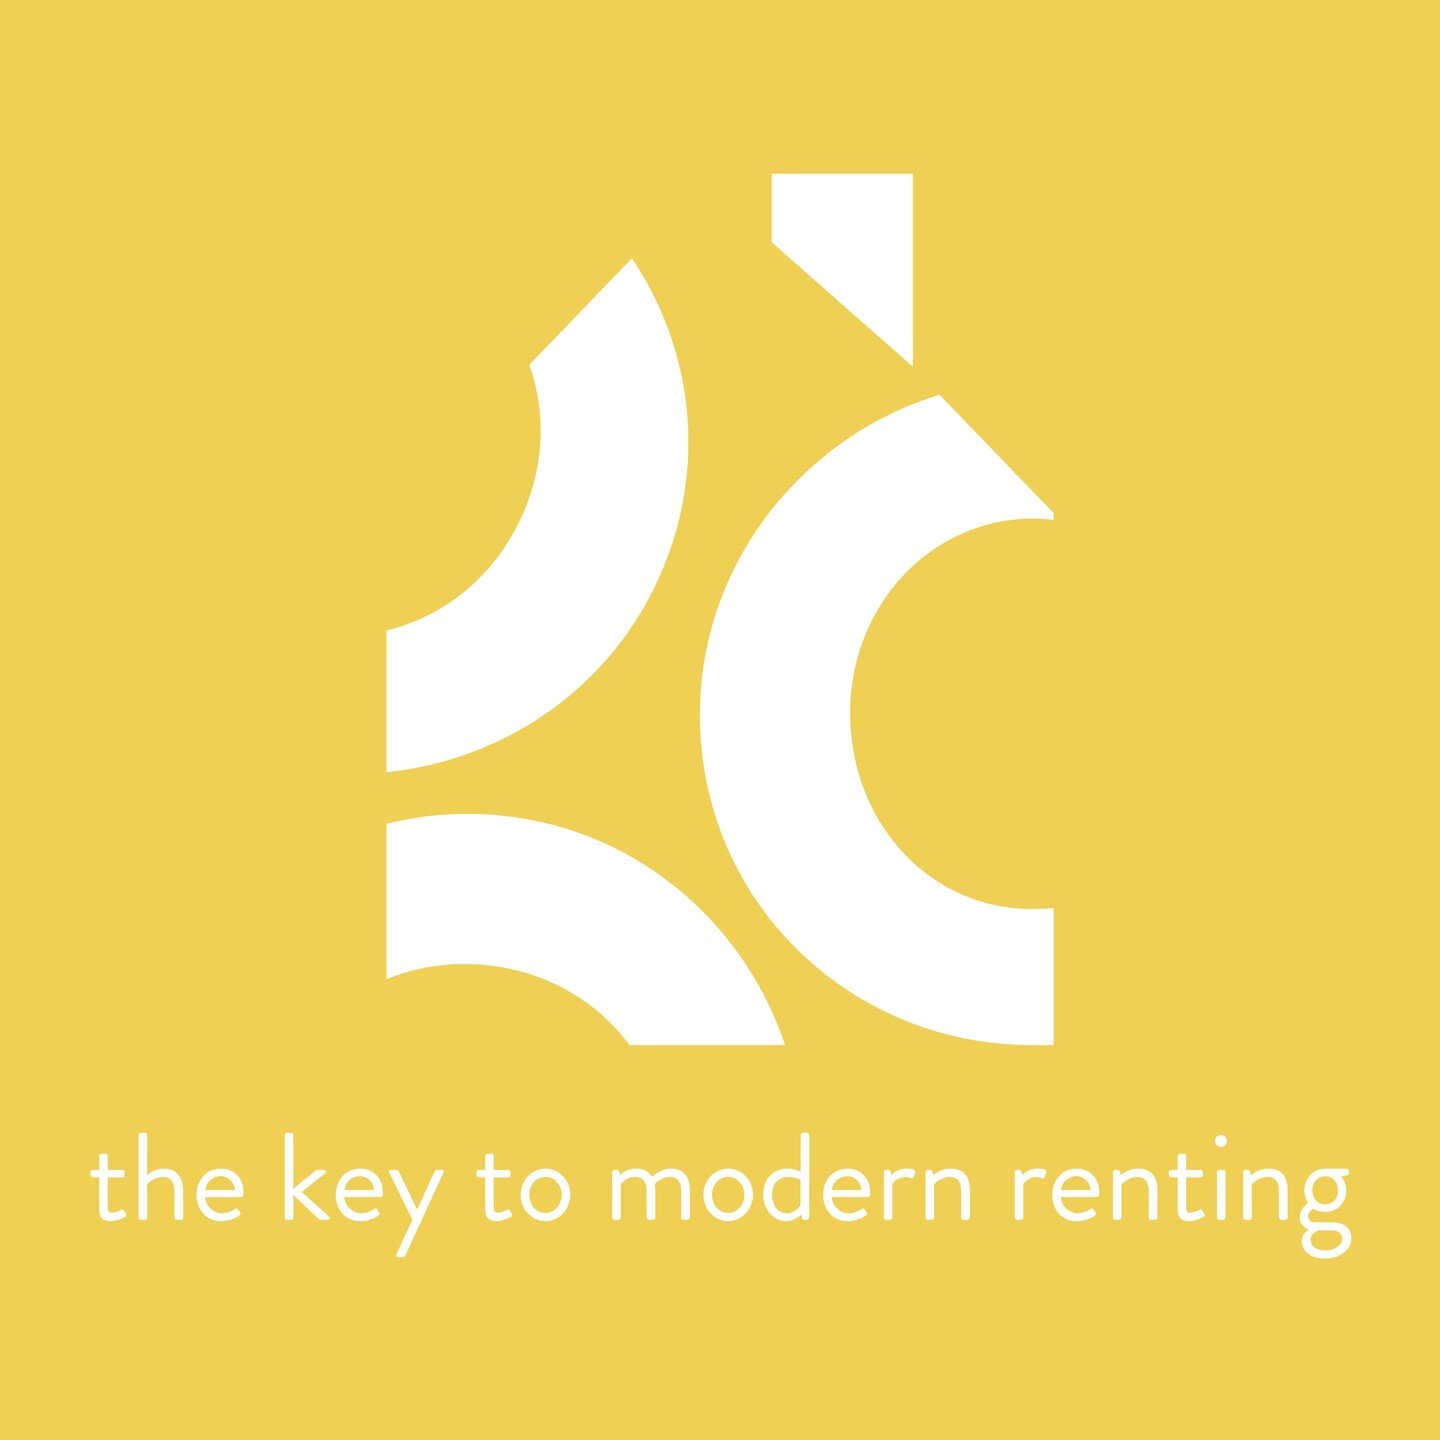 current: the key to modern renting. 
Check out the link in our bio to explore our website to download the current extension!